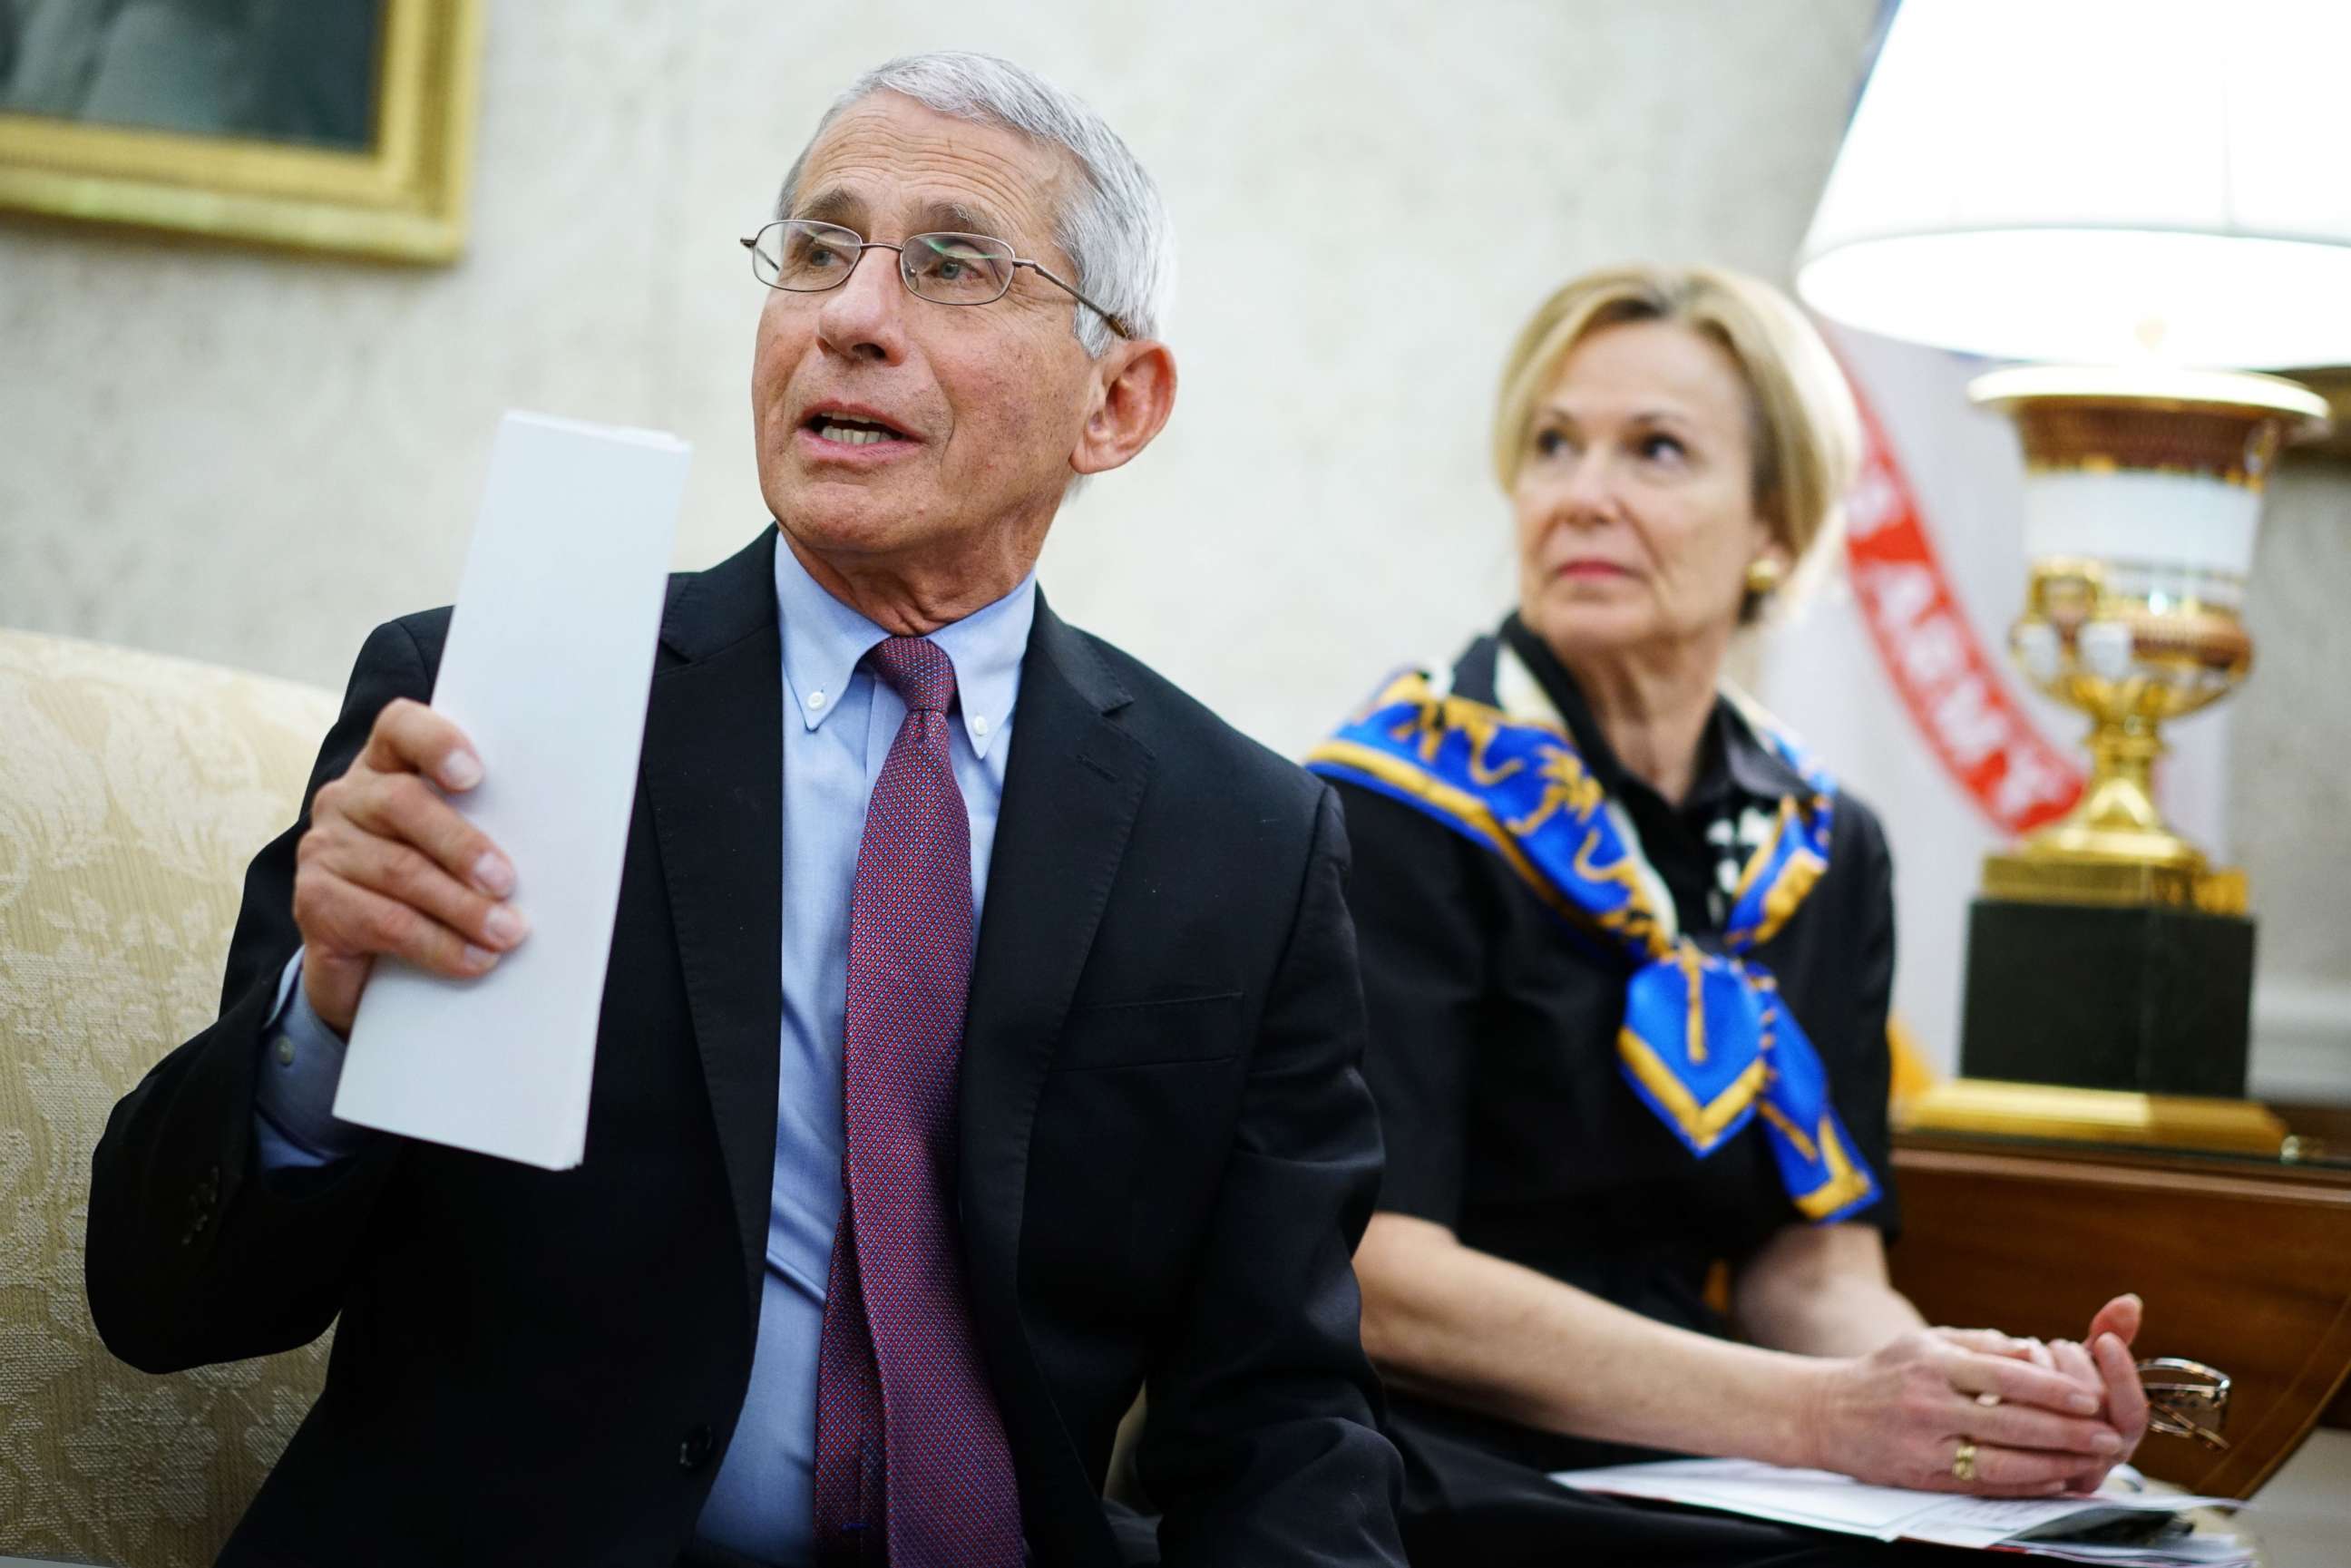 PHOTO: Dr. Anthony Fauci speaks while sitting next to Deborah Birx, during a meeting with President Donald Trump and Louisiana Governor John Bel Edwards in the Oval Office of the White House in Washington, April 29, 2020.